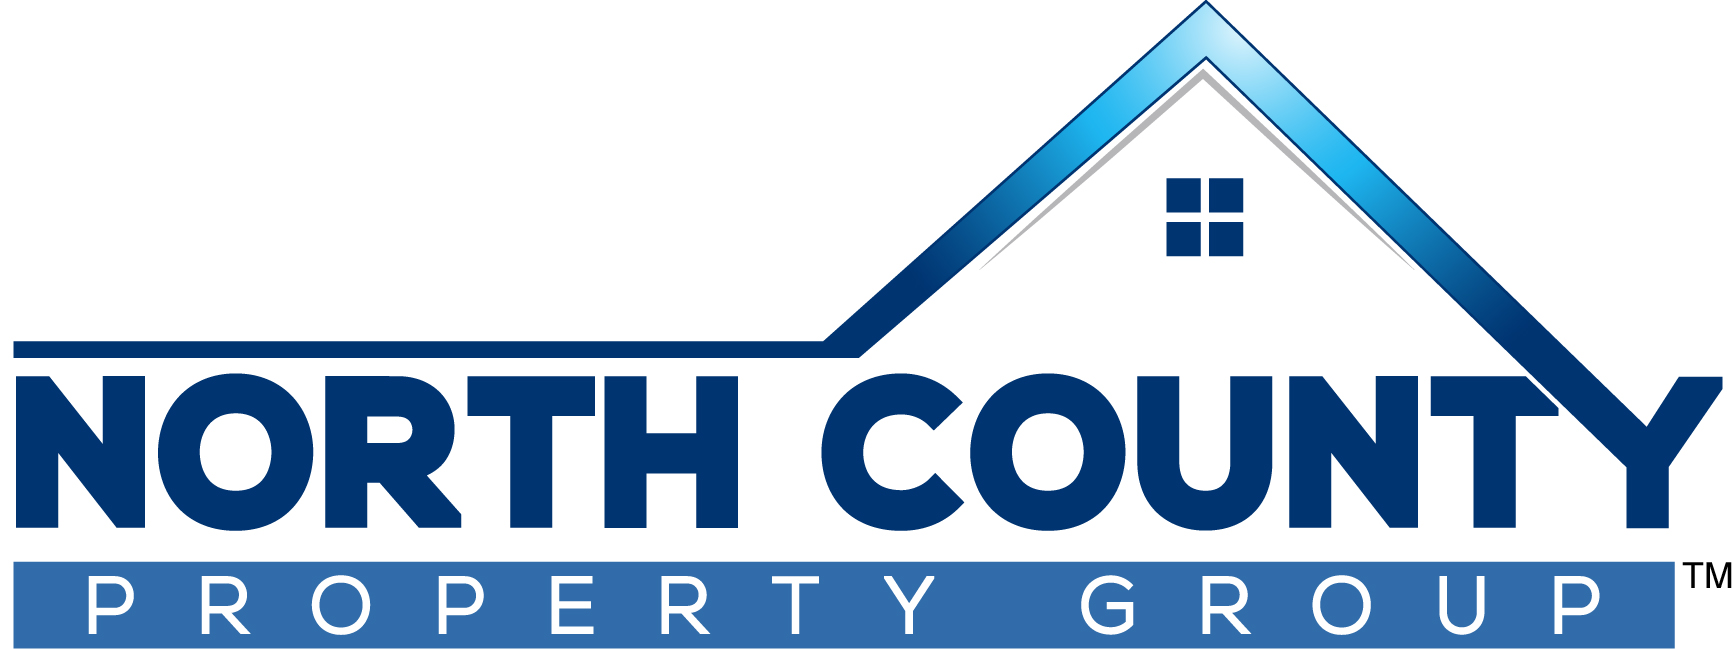 North County Property Group logo